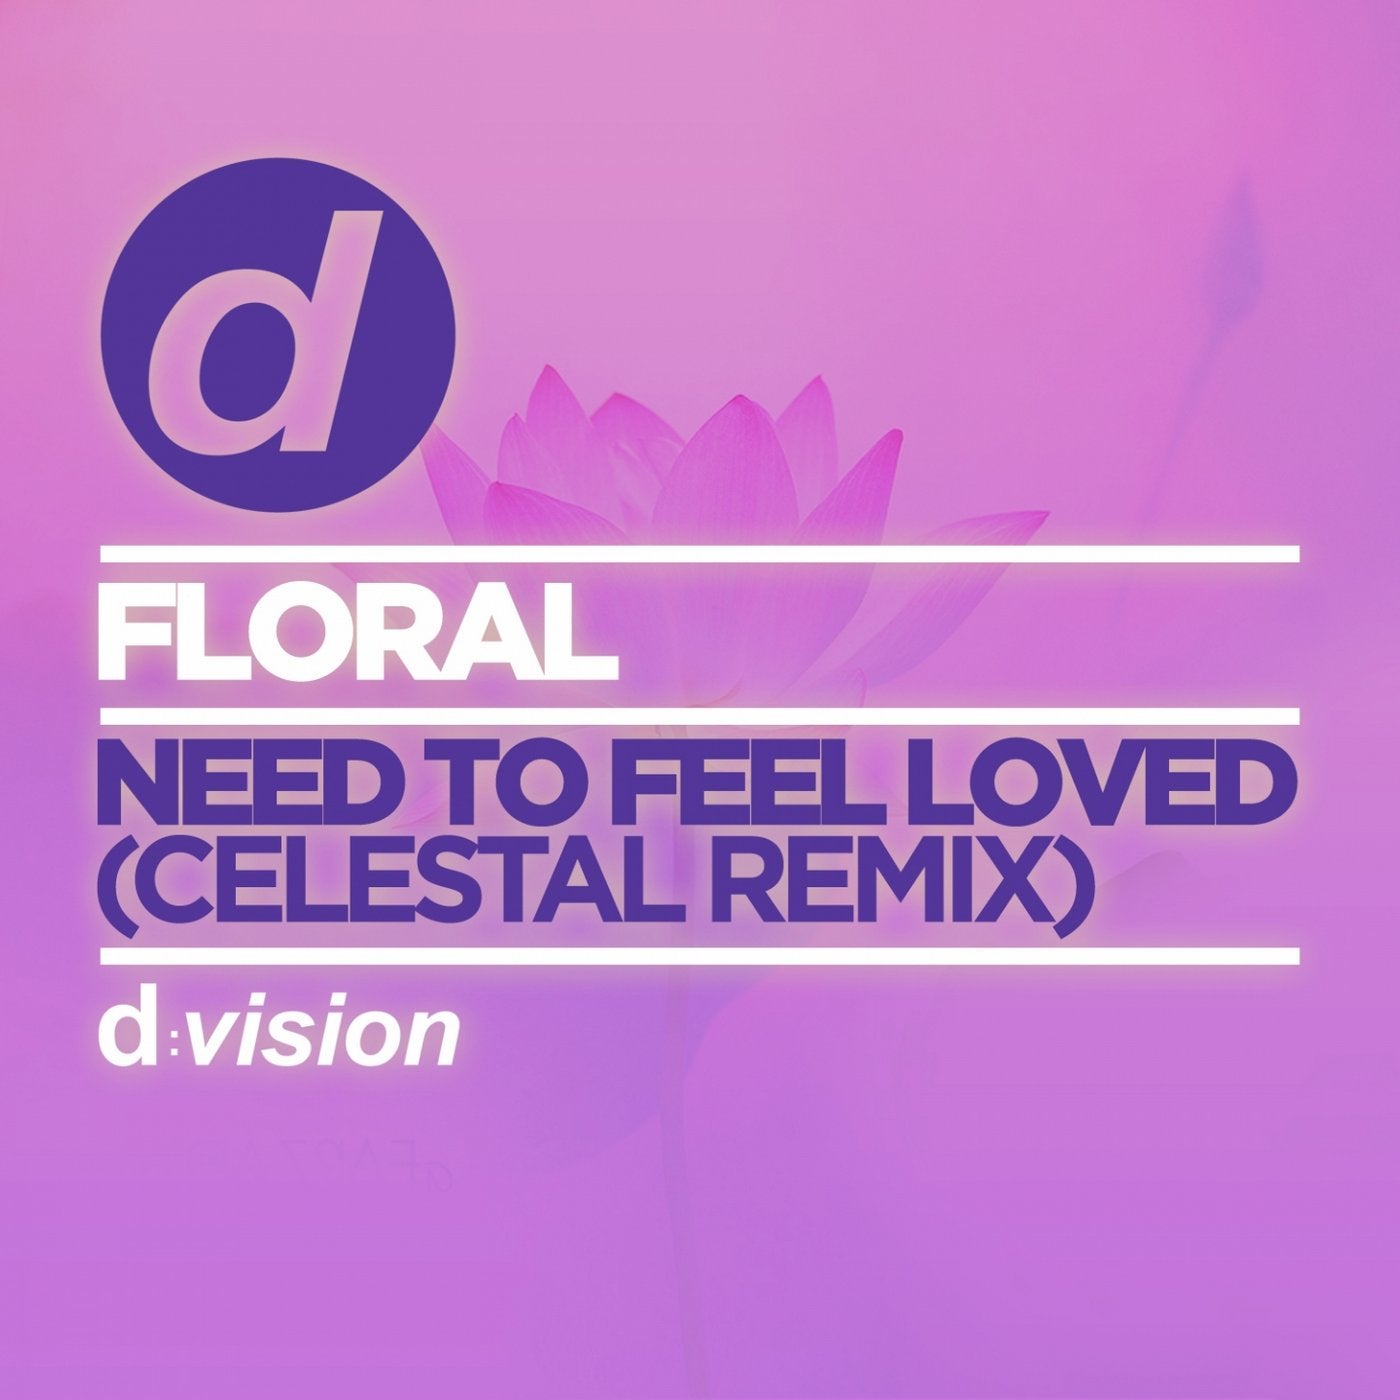 Reflekt need to feel loved. Need to feel Loved. Need to feel Loved Ноты. Floral need to feel Loved the Reload Remix. Need to feel Loved positiva.